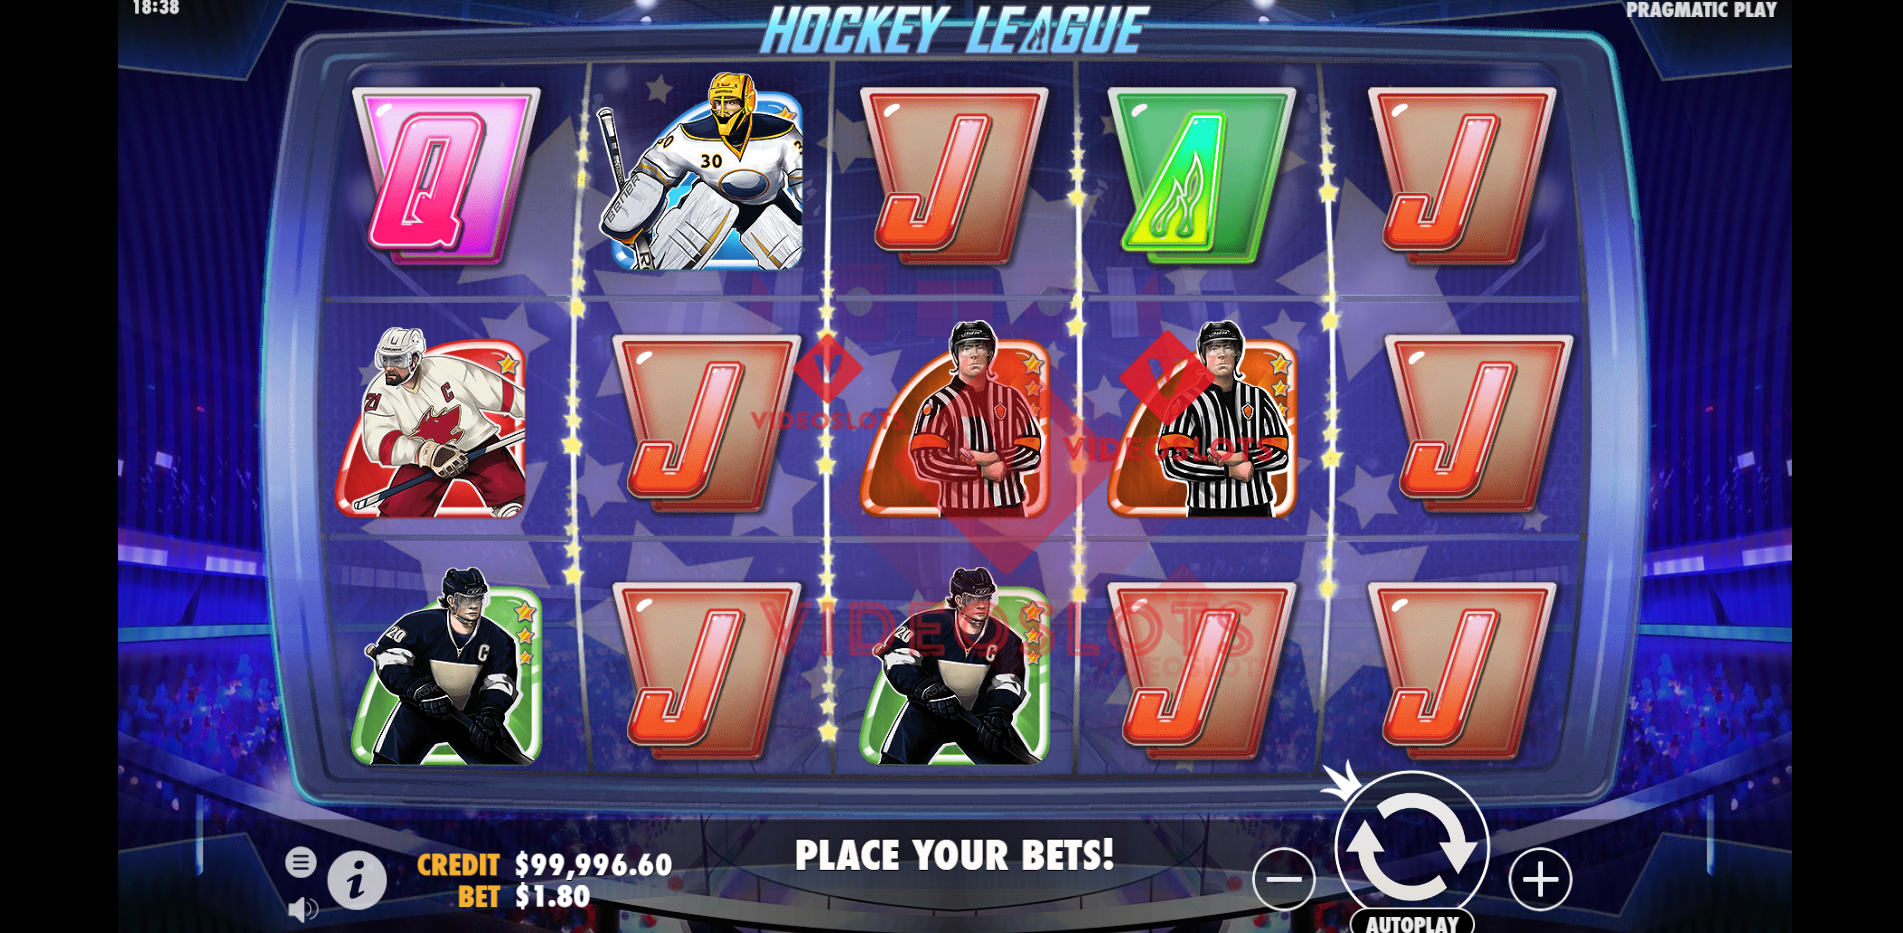 Base Game for Hockey League slot by Pragmatic Play